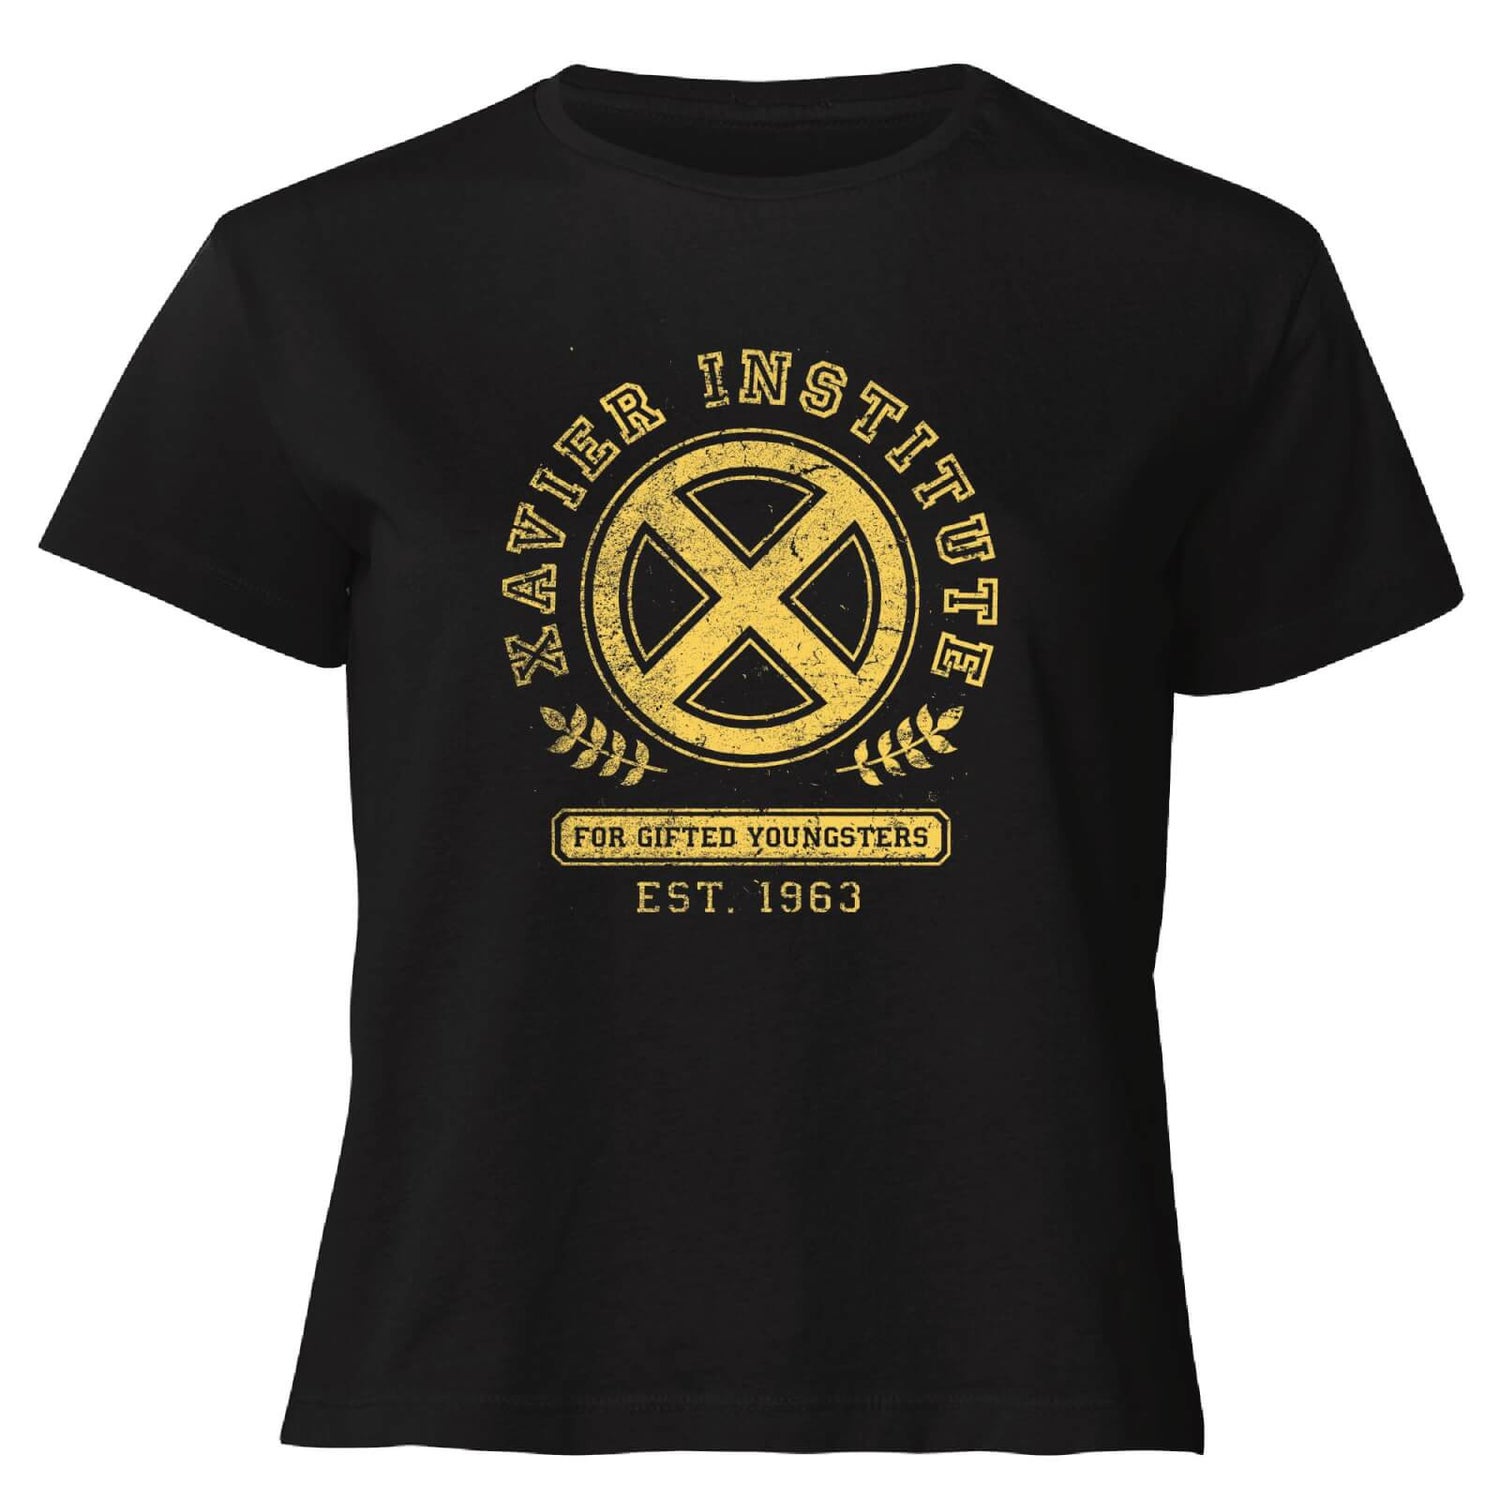 X-Men Xavier Institute For Gifted Youngsters Drk Women's Cropped T-Shirt - Black